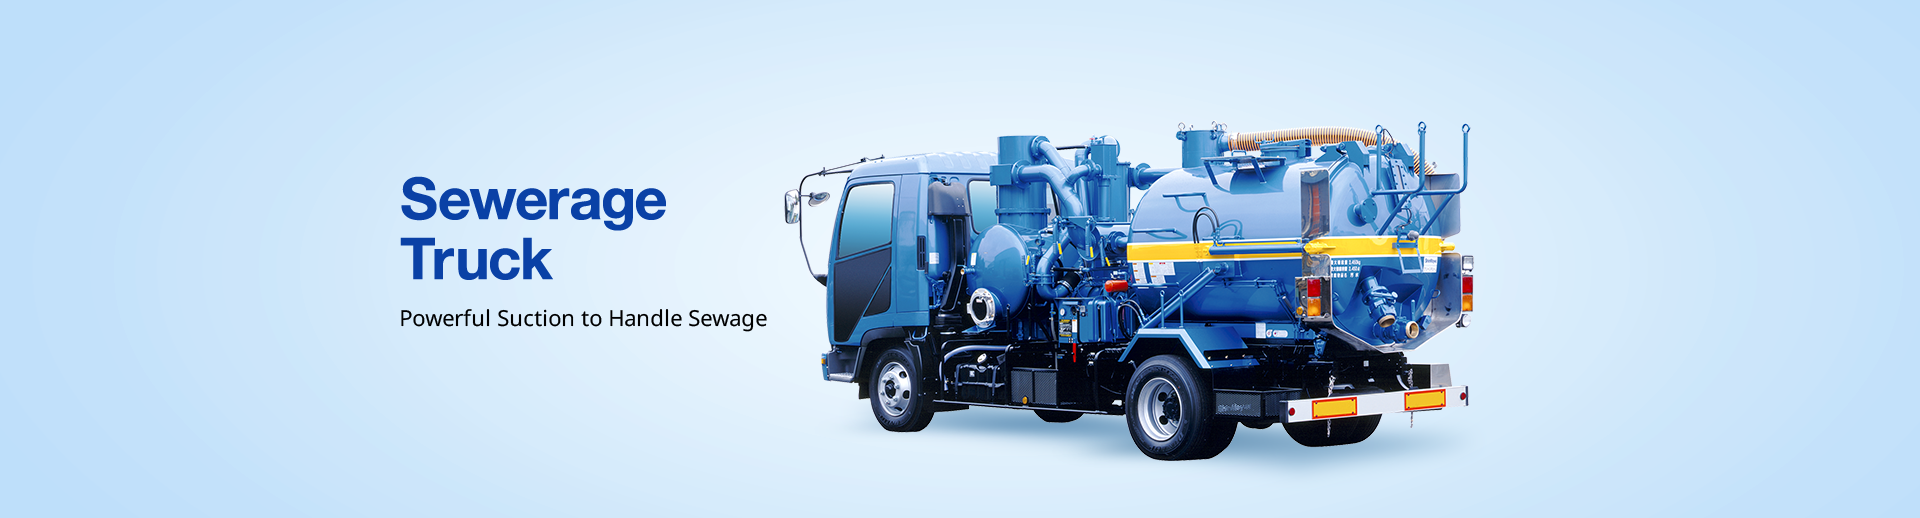 Sewerage Truck Powerful Suction to Handle Sewage